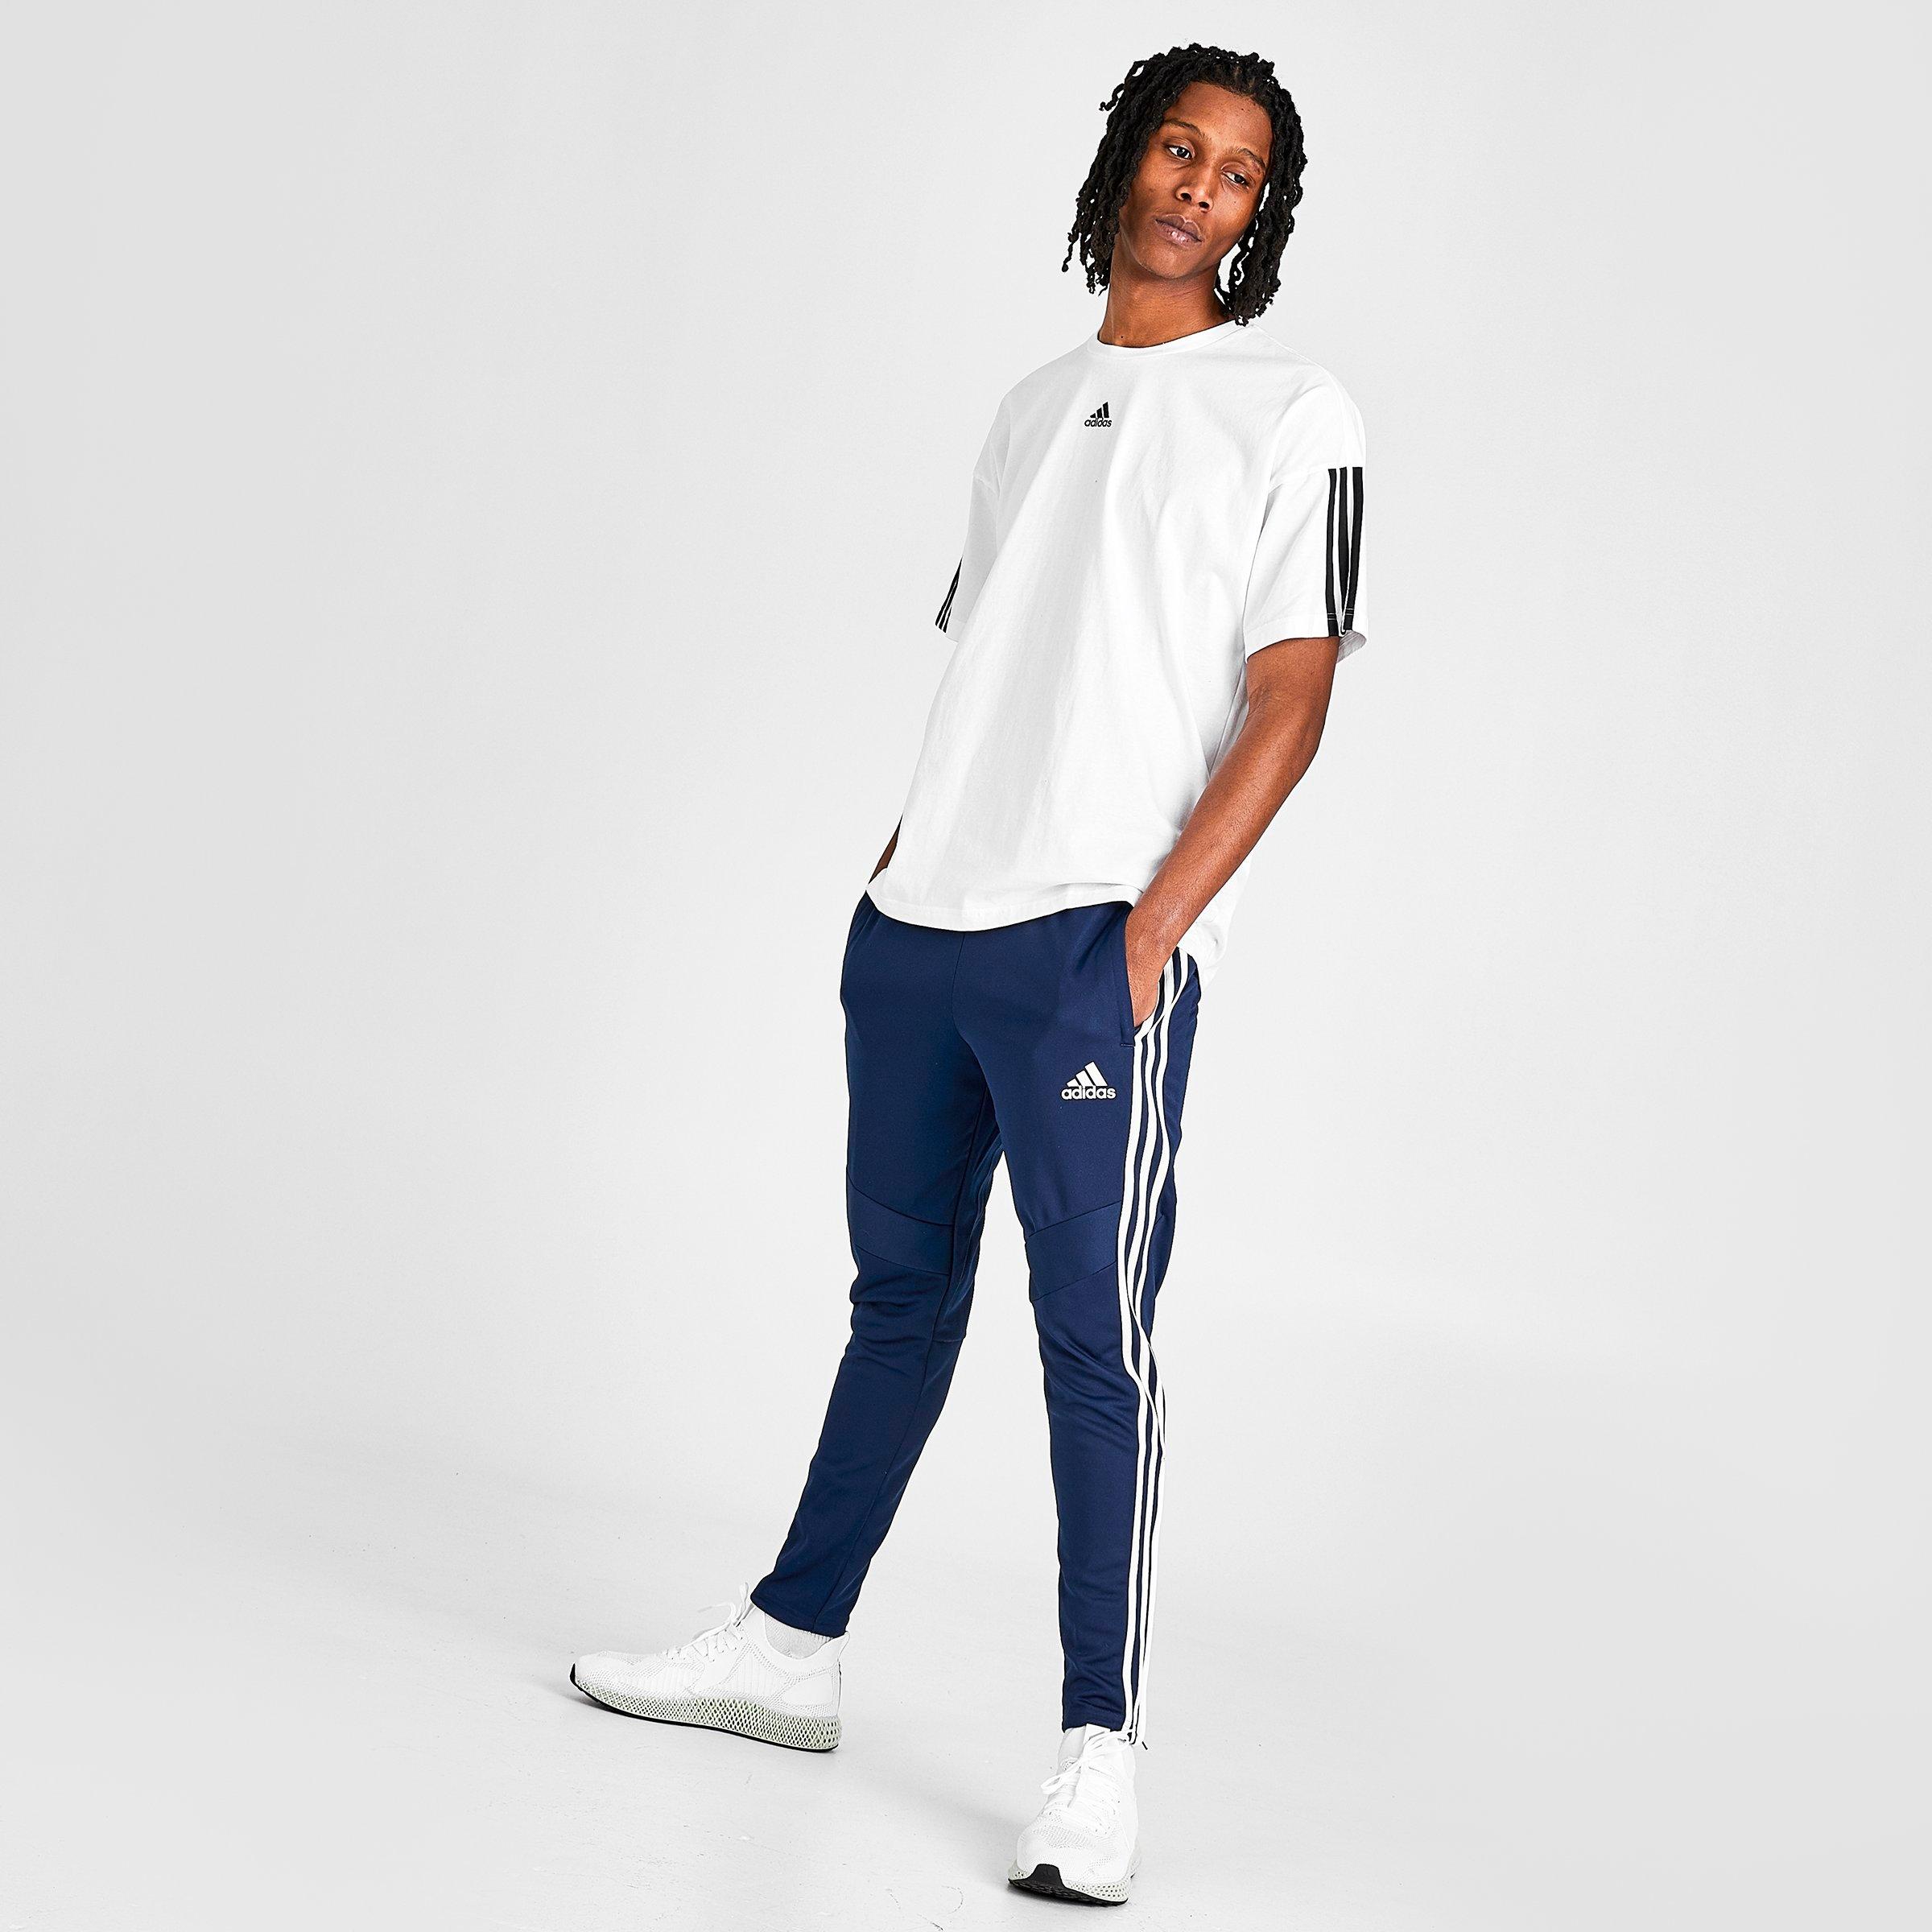 adidas sweatpants outfit